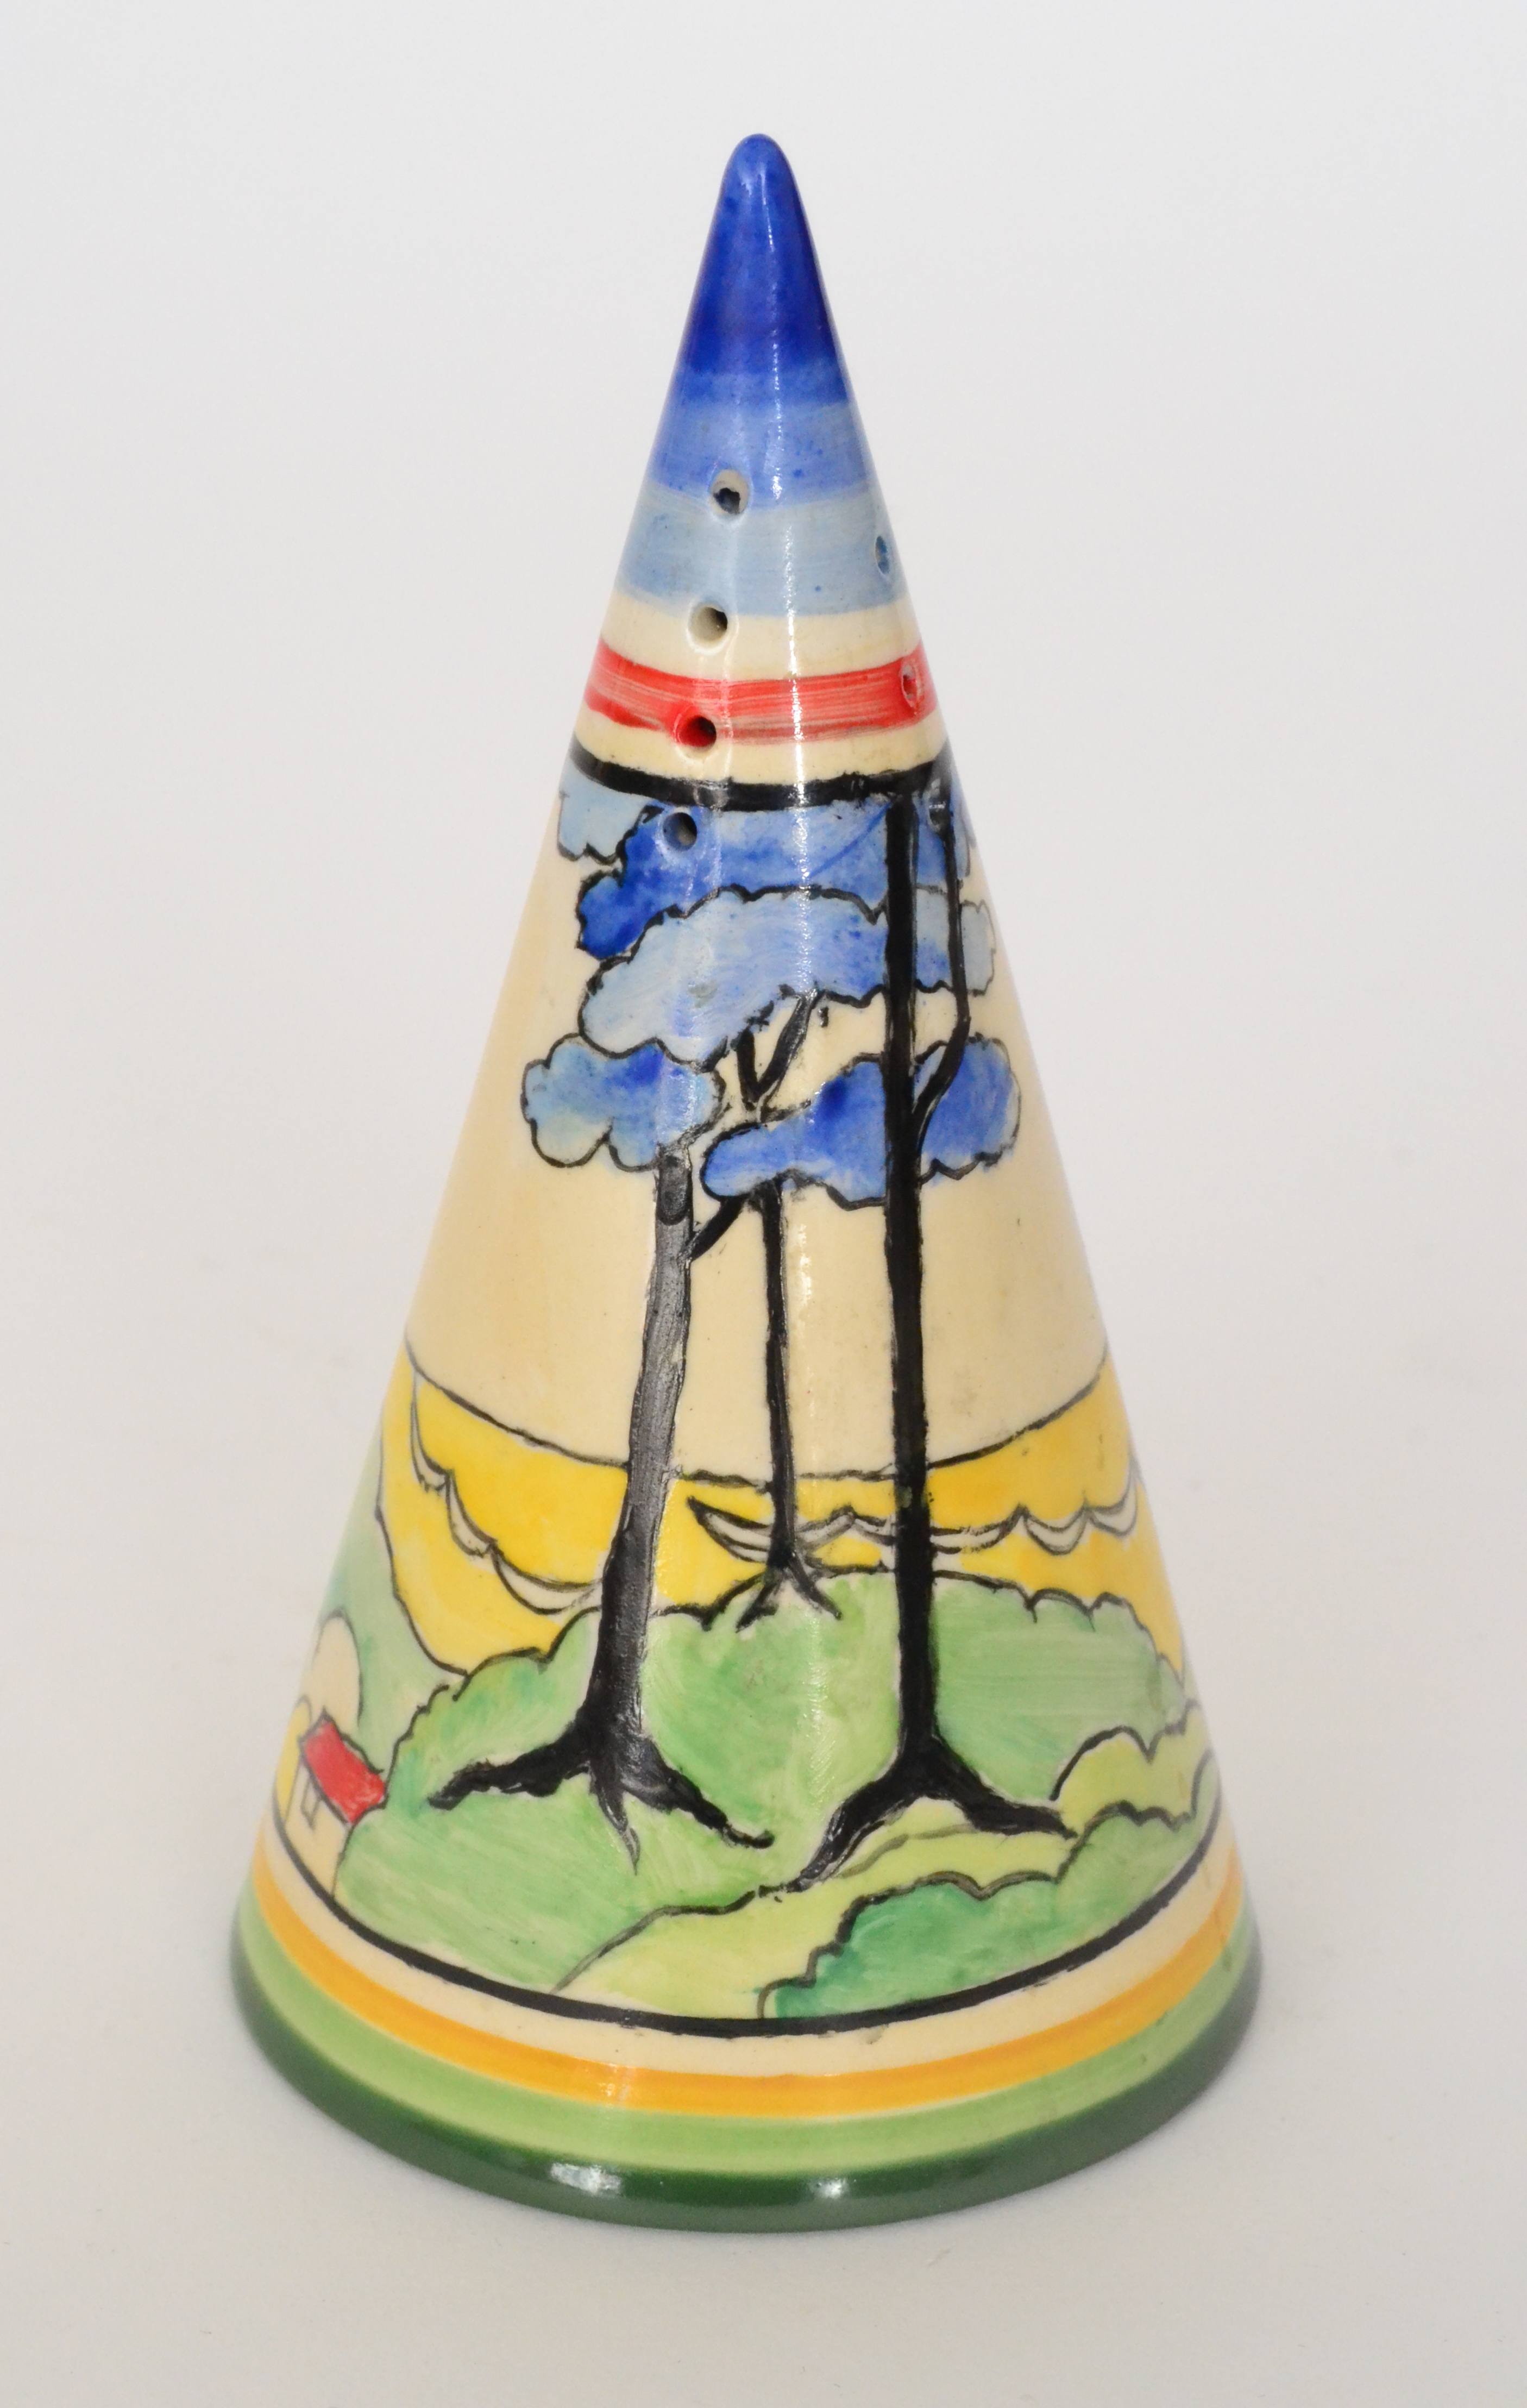 A Terry Abbots tribute conical sugar sifter decorated in the Blue Firs pattern,